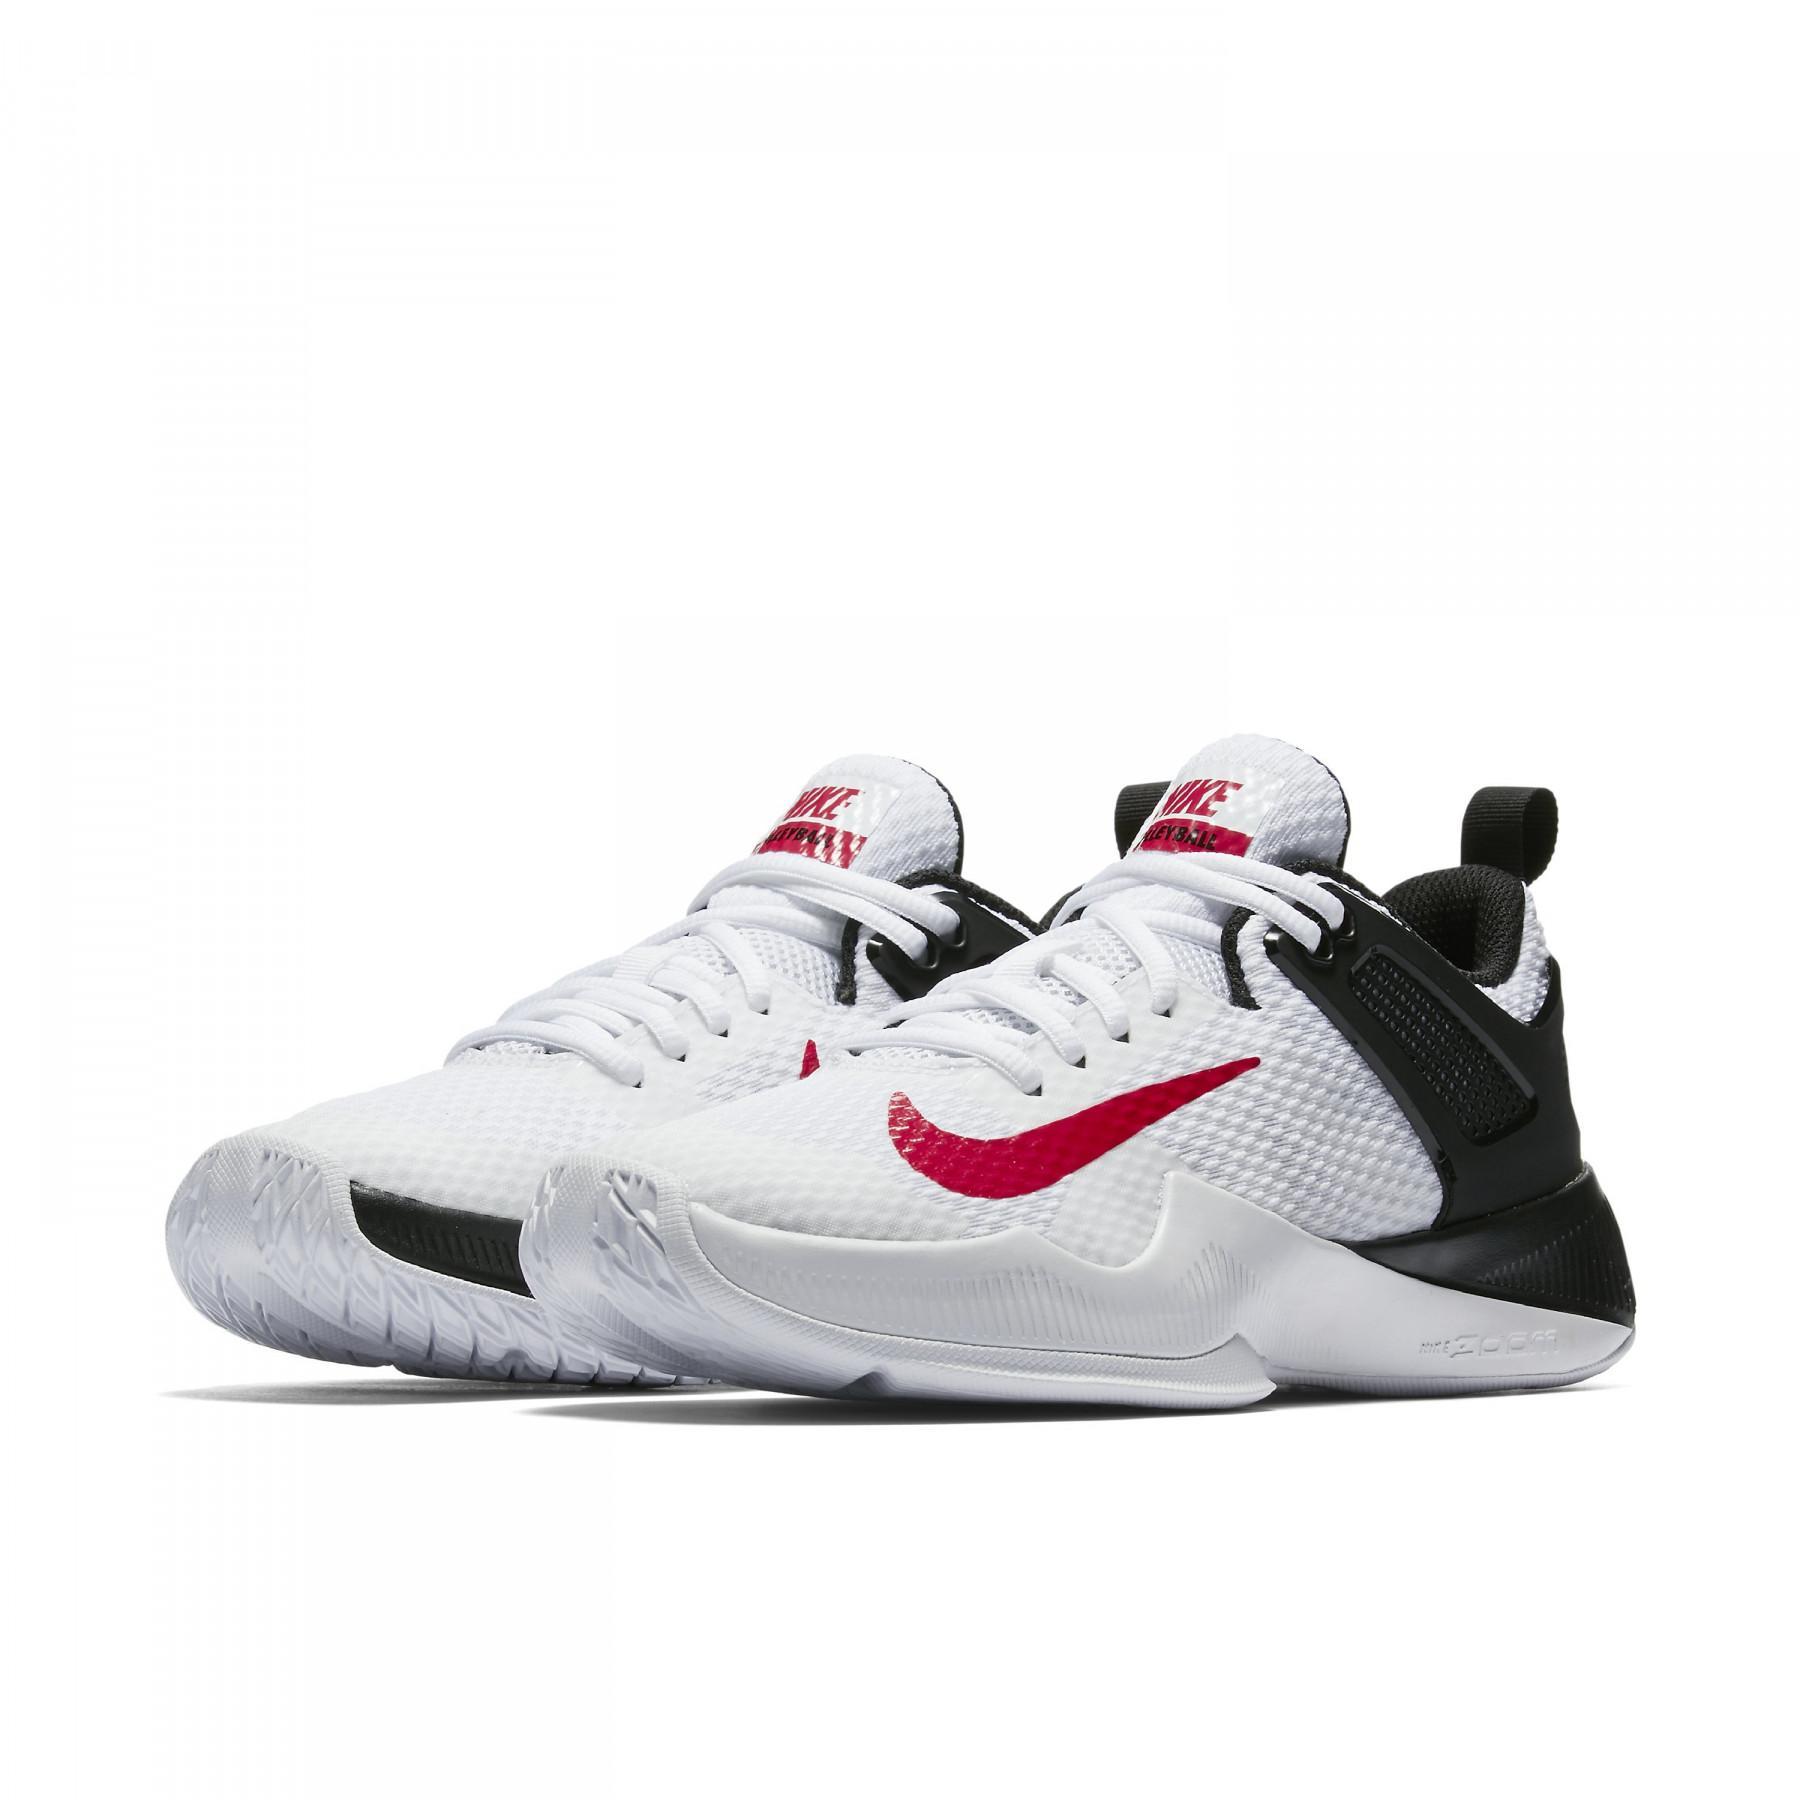 Women's shoes Nike Air Zoom Hyperace